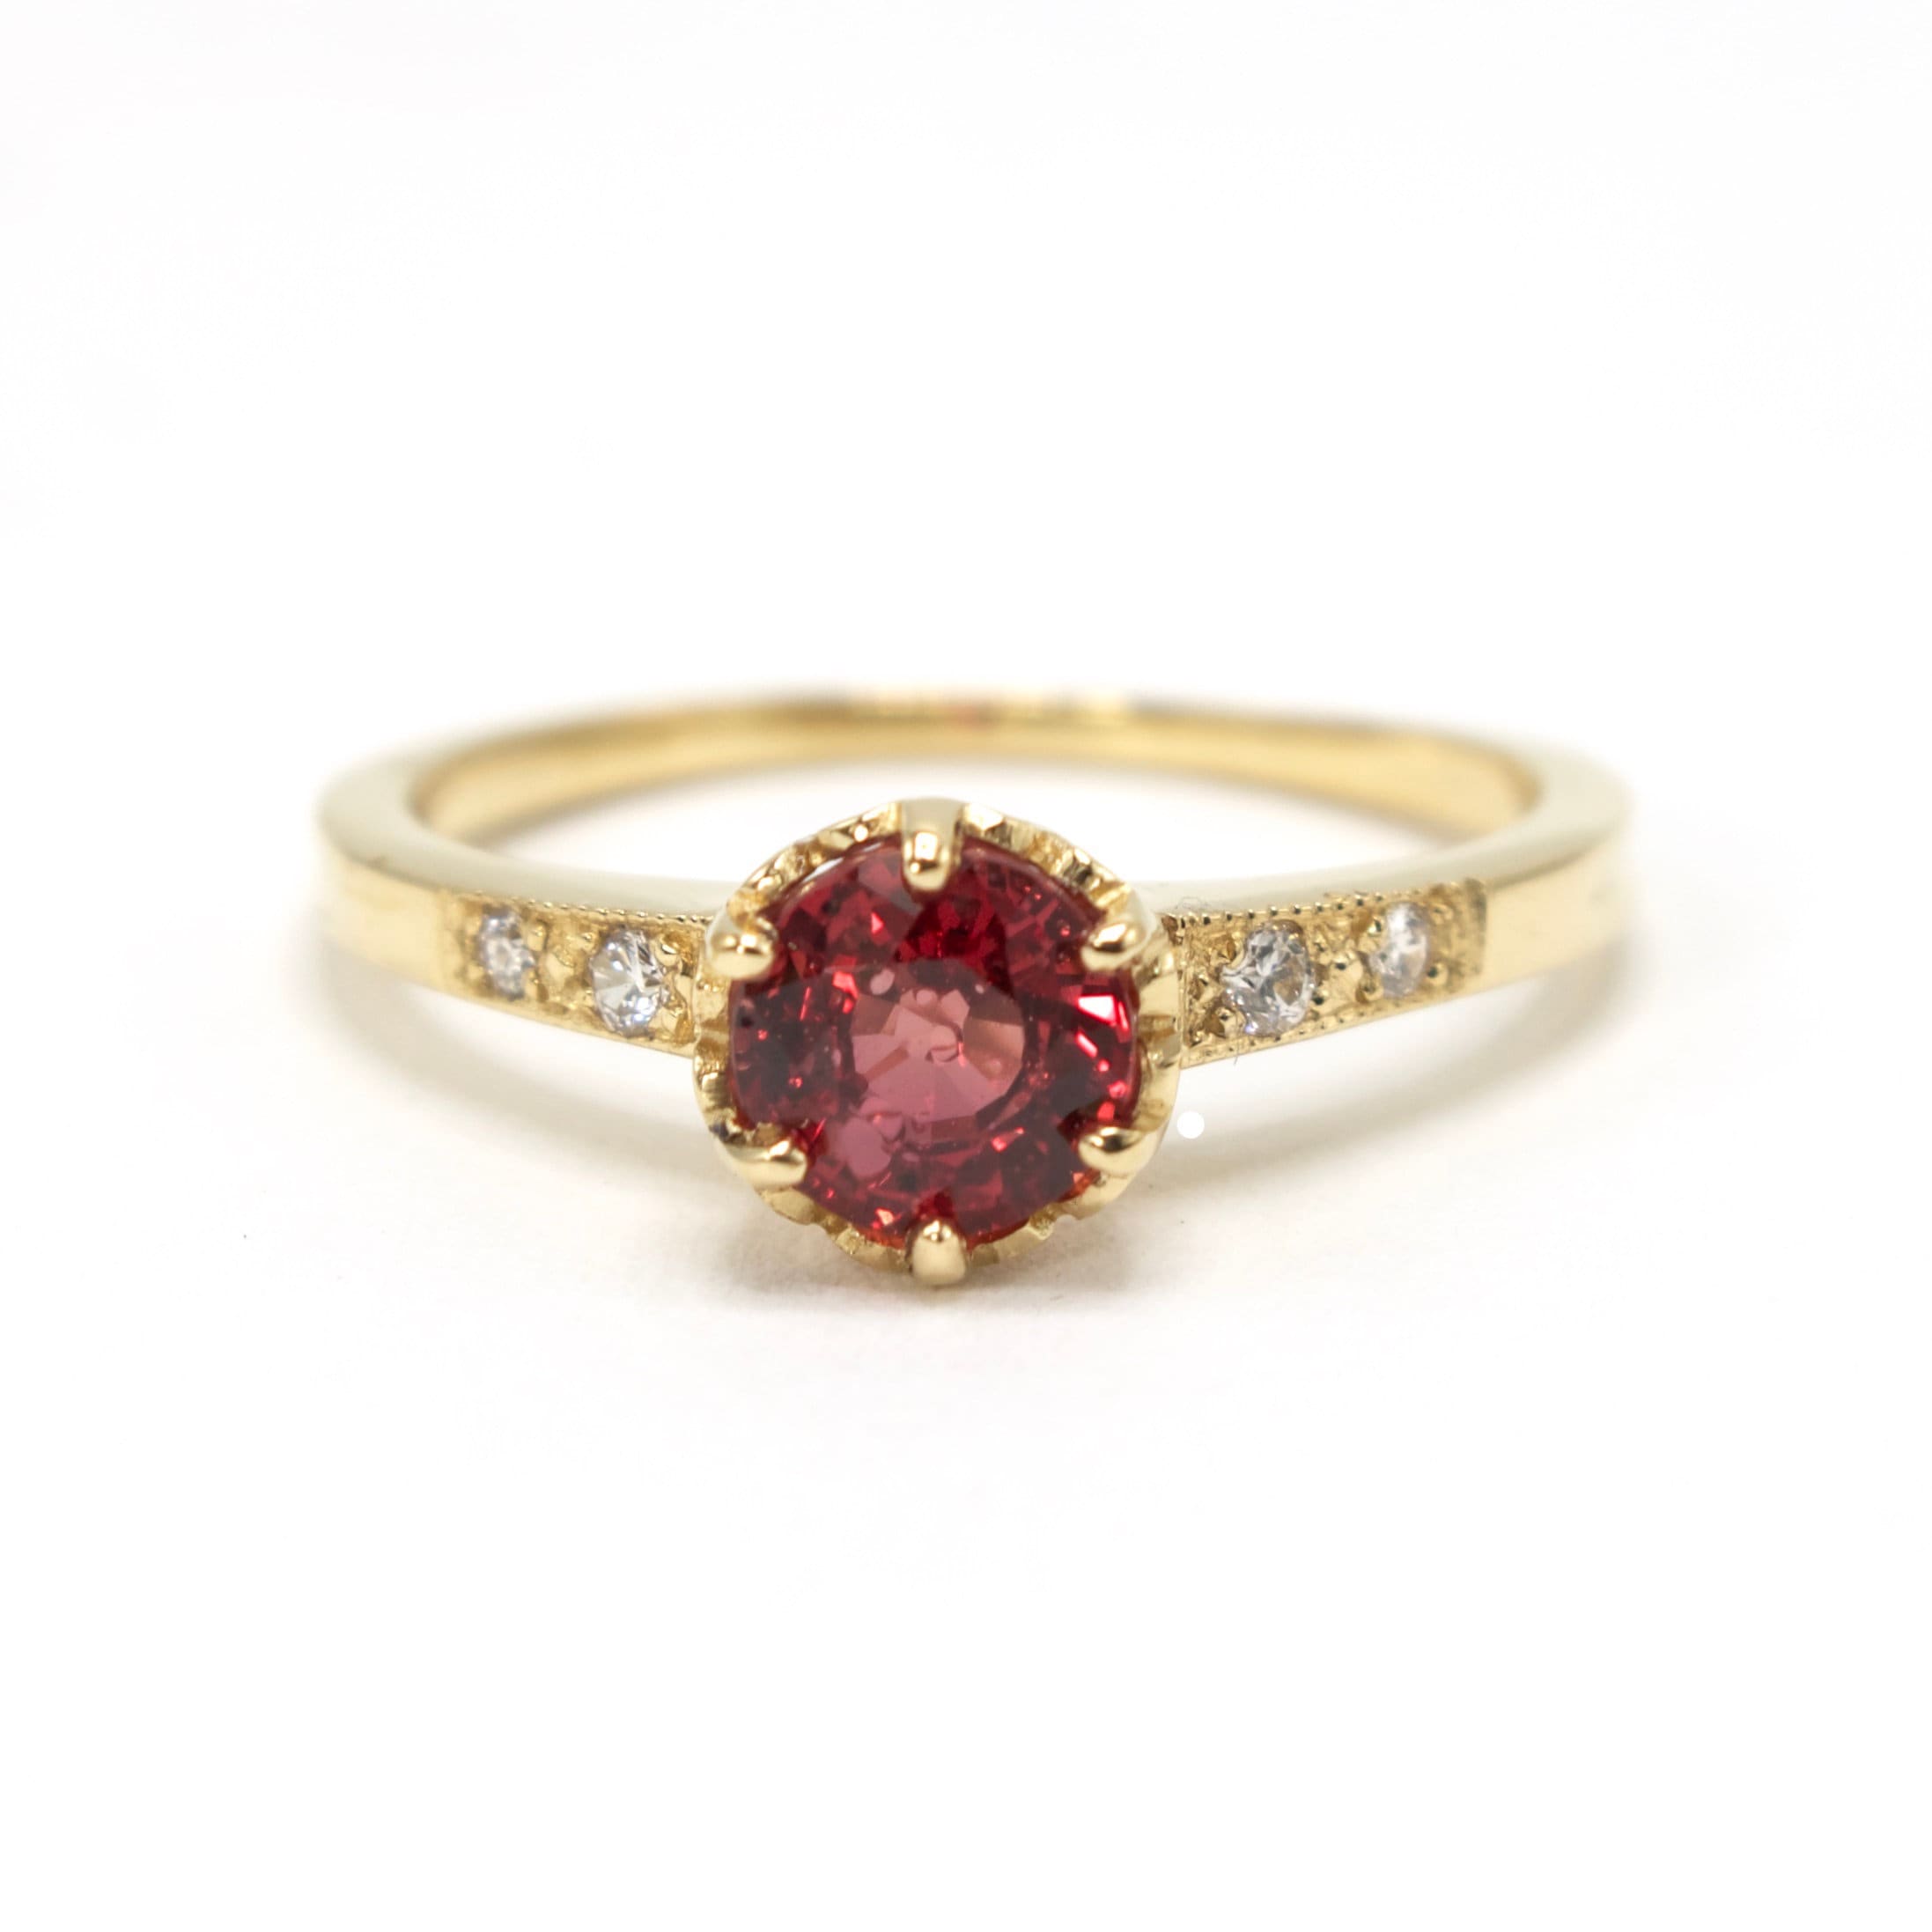 0.80 carat Bright Cherry Orange Sapphire in Edwardian Style 18K Yellow Gold Solitaire Ring